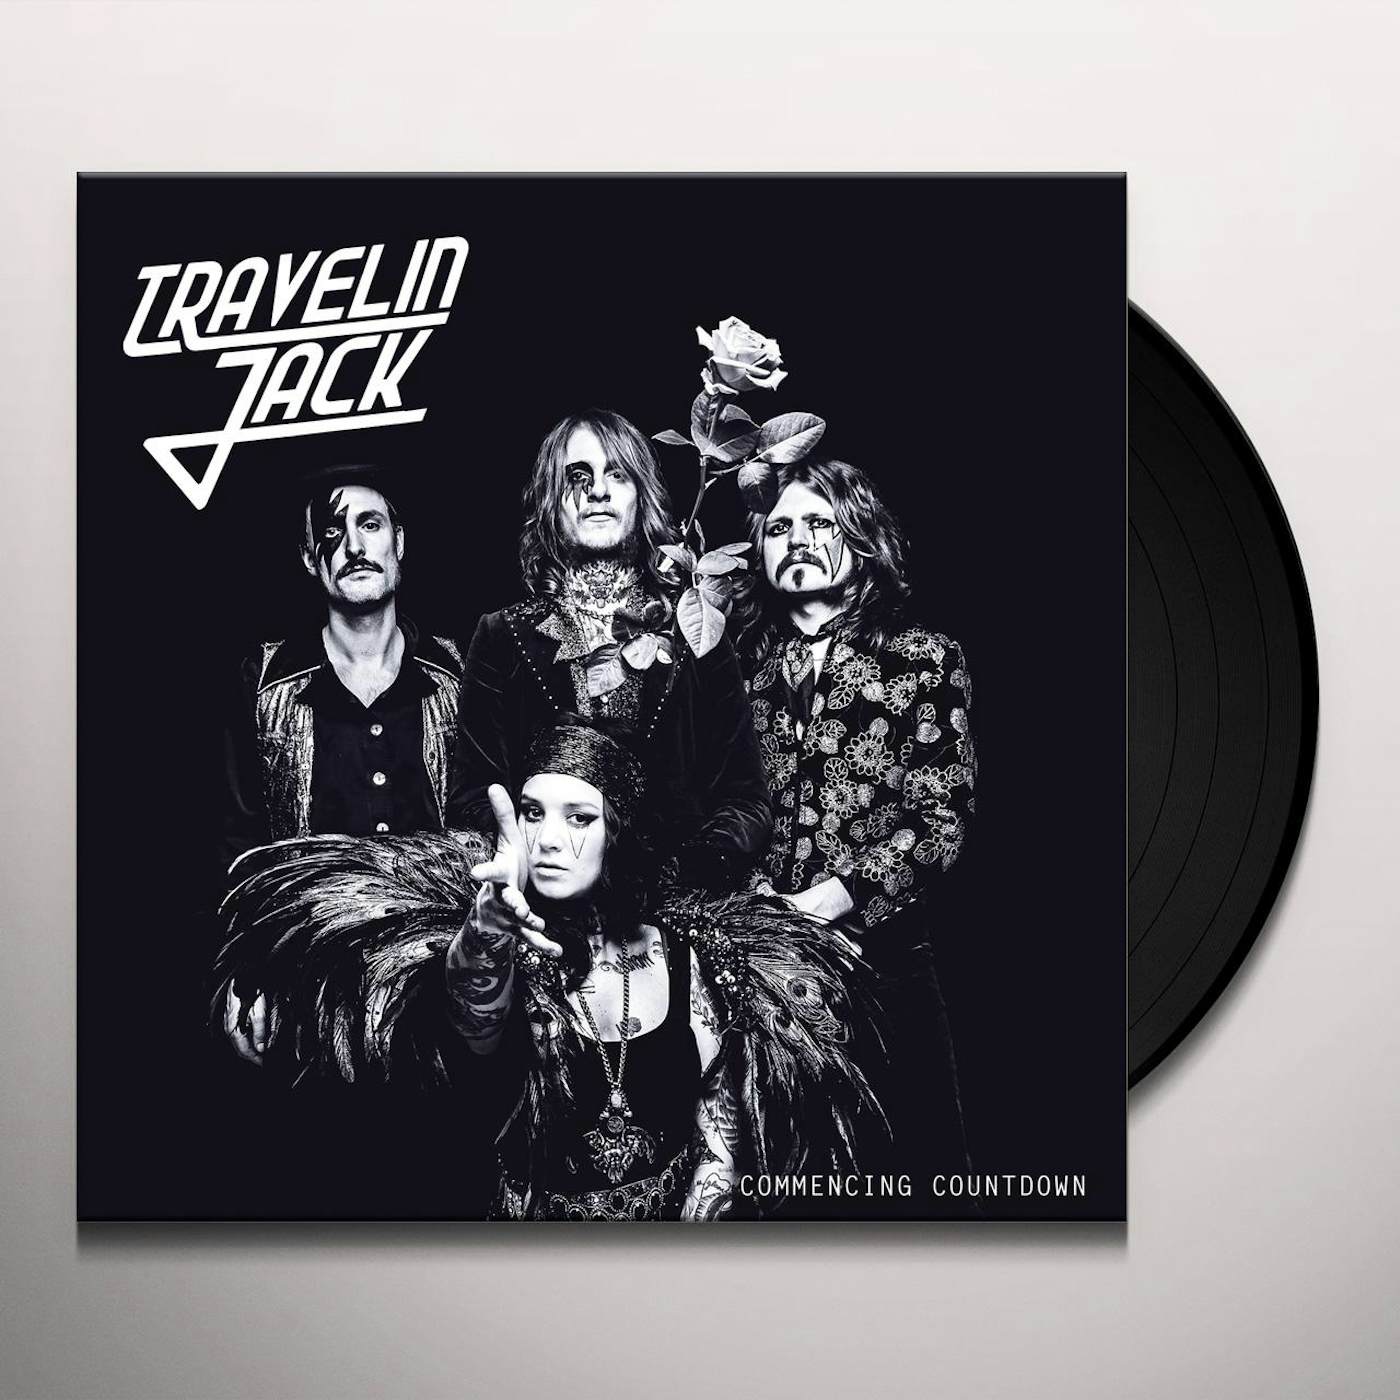 Travelin Jack Commencing Countdown Vinyl Record